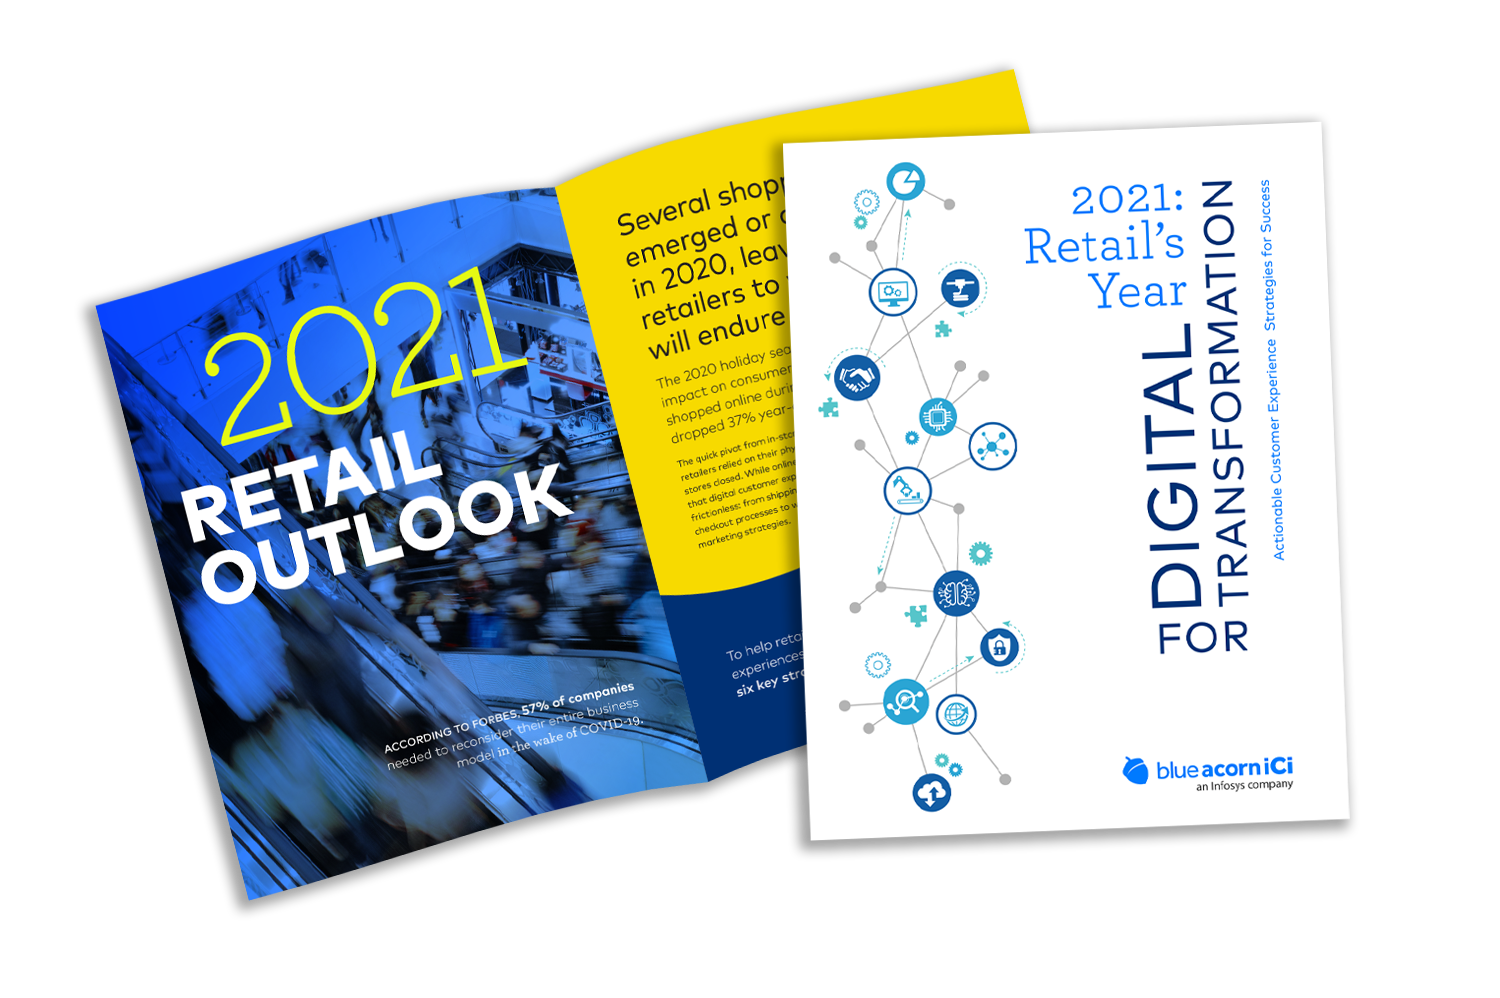 2021 retails years for digital transformation